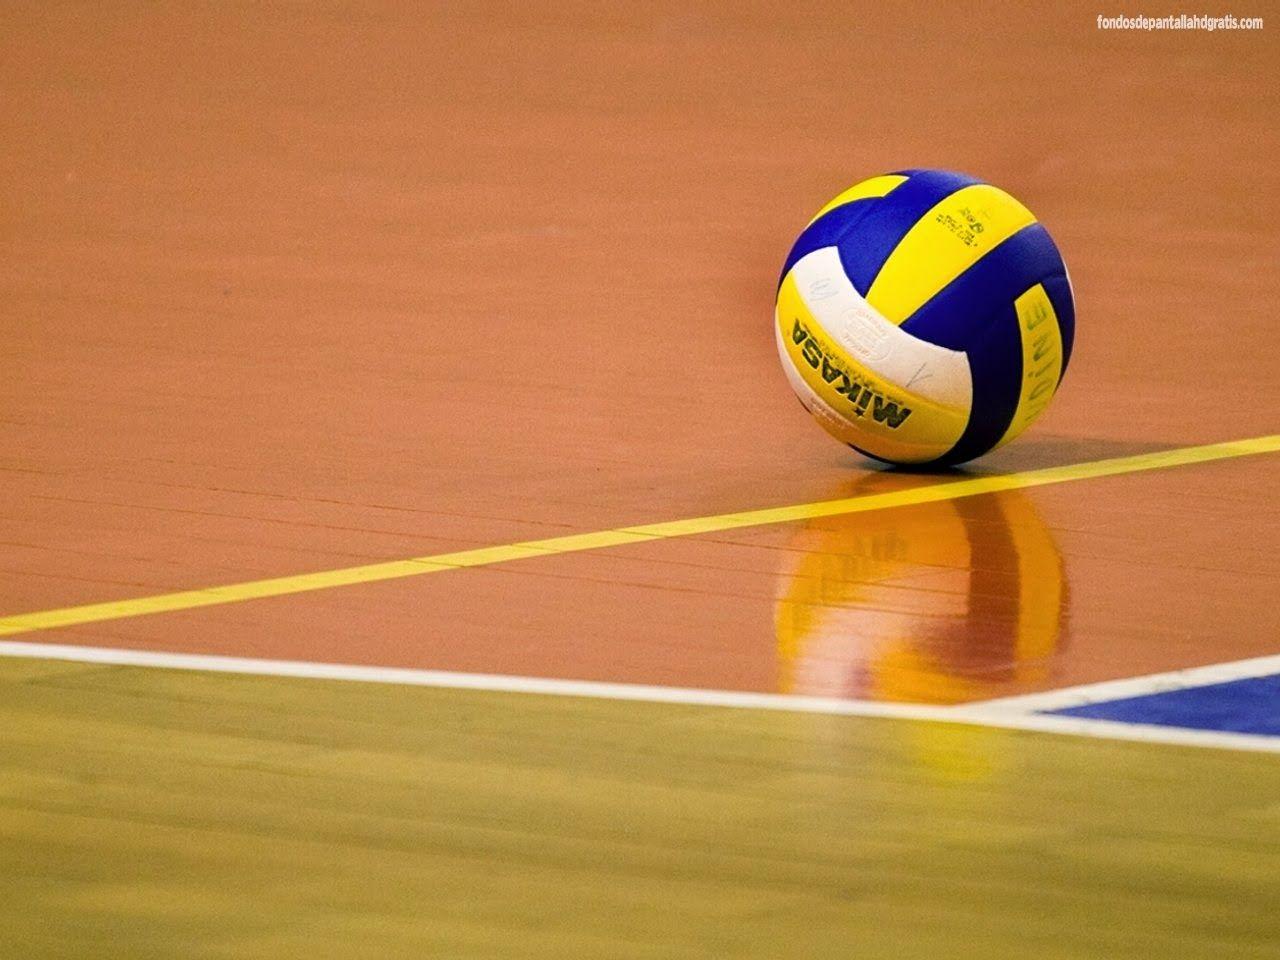 Volleyball Image Download Free New Wallpaper HD High 1920×1080 Volleyball Wallpaper (37 Wallpaper). Ad. Volleyball wallpaper, Volleyball image, Volleyball